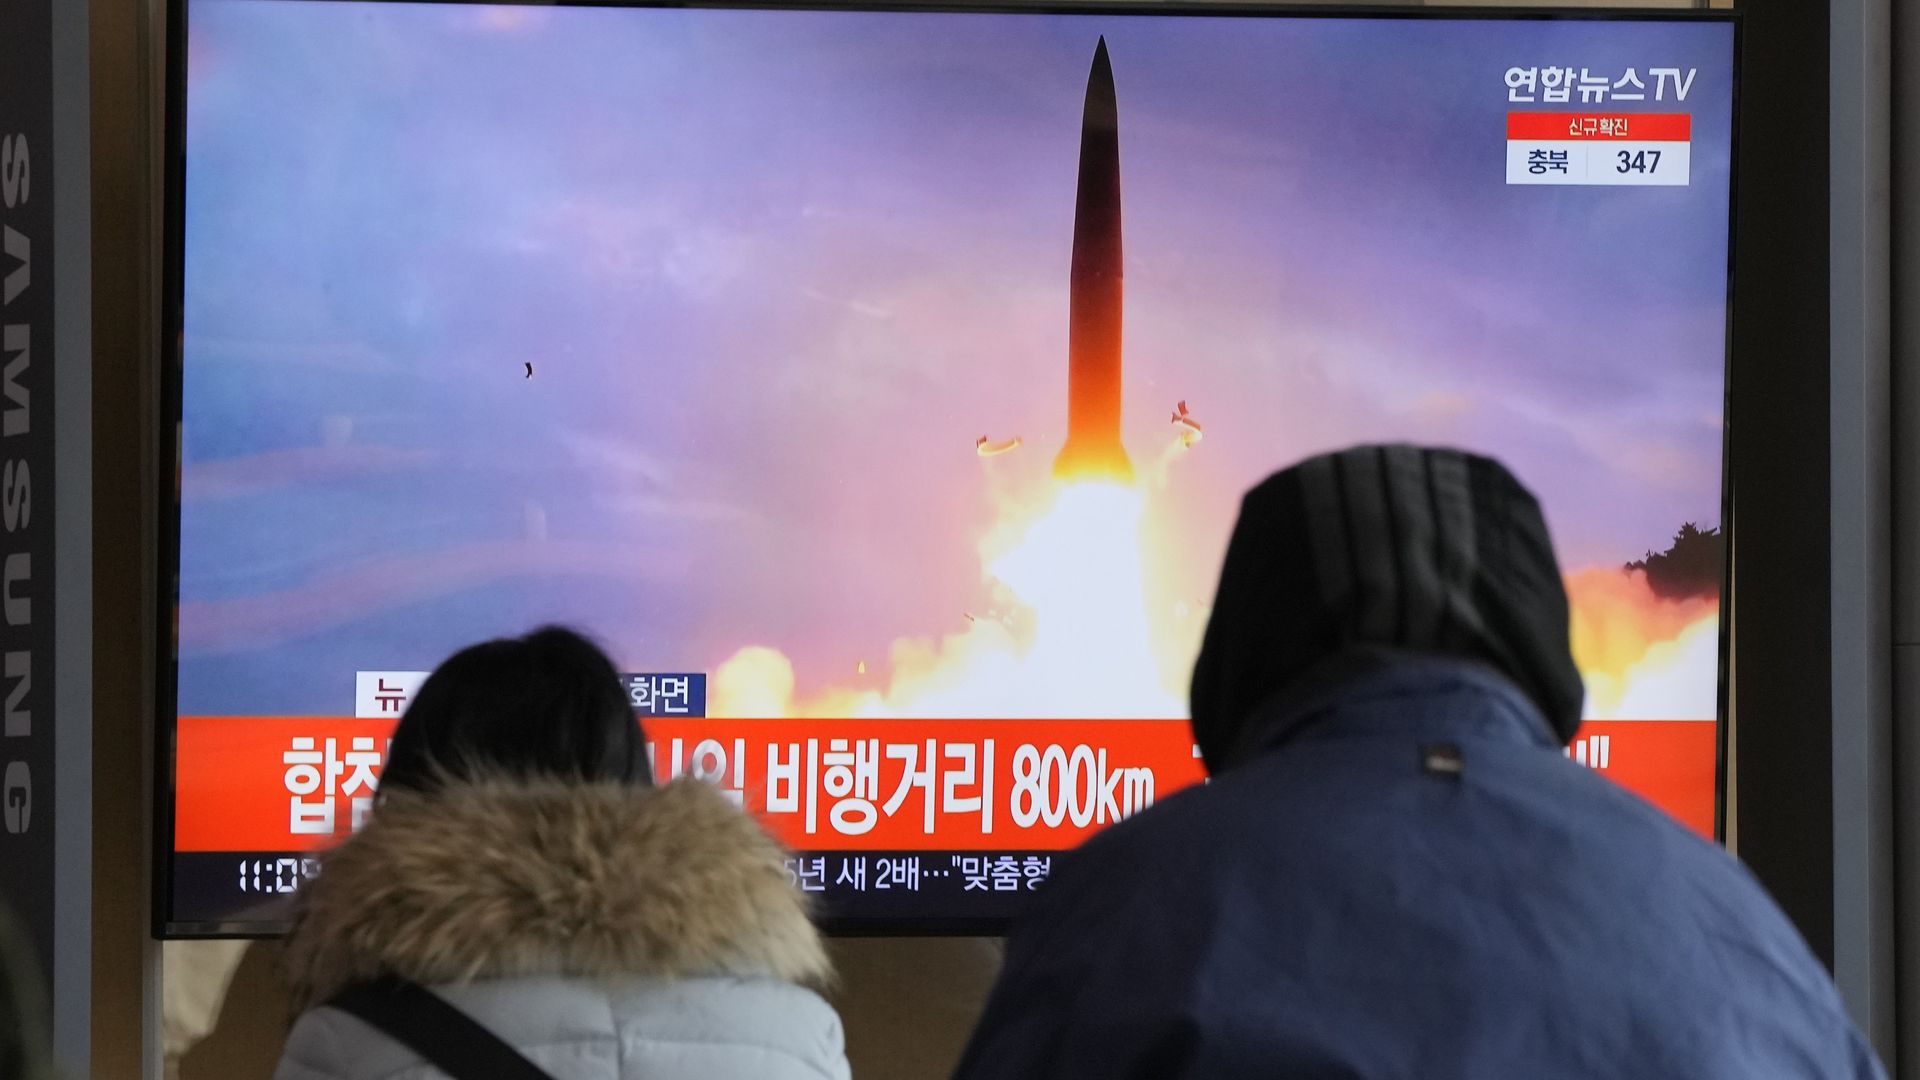 People watch a TV showing a file image of North Korea's missile launch during a news program at the Seoul Railway Station in Seoul, South Korea, Sunday, Jan. 30.